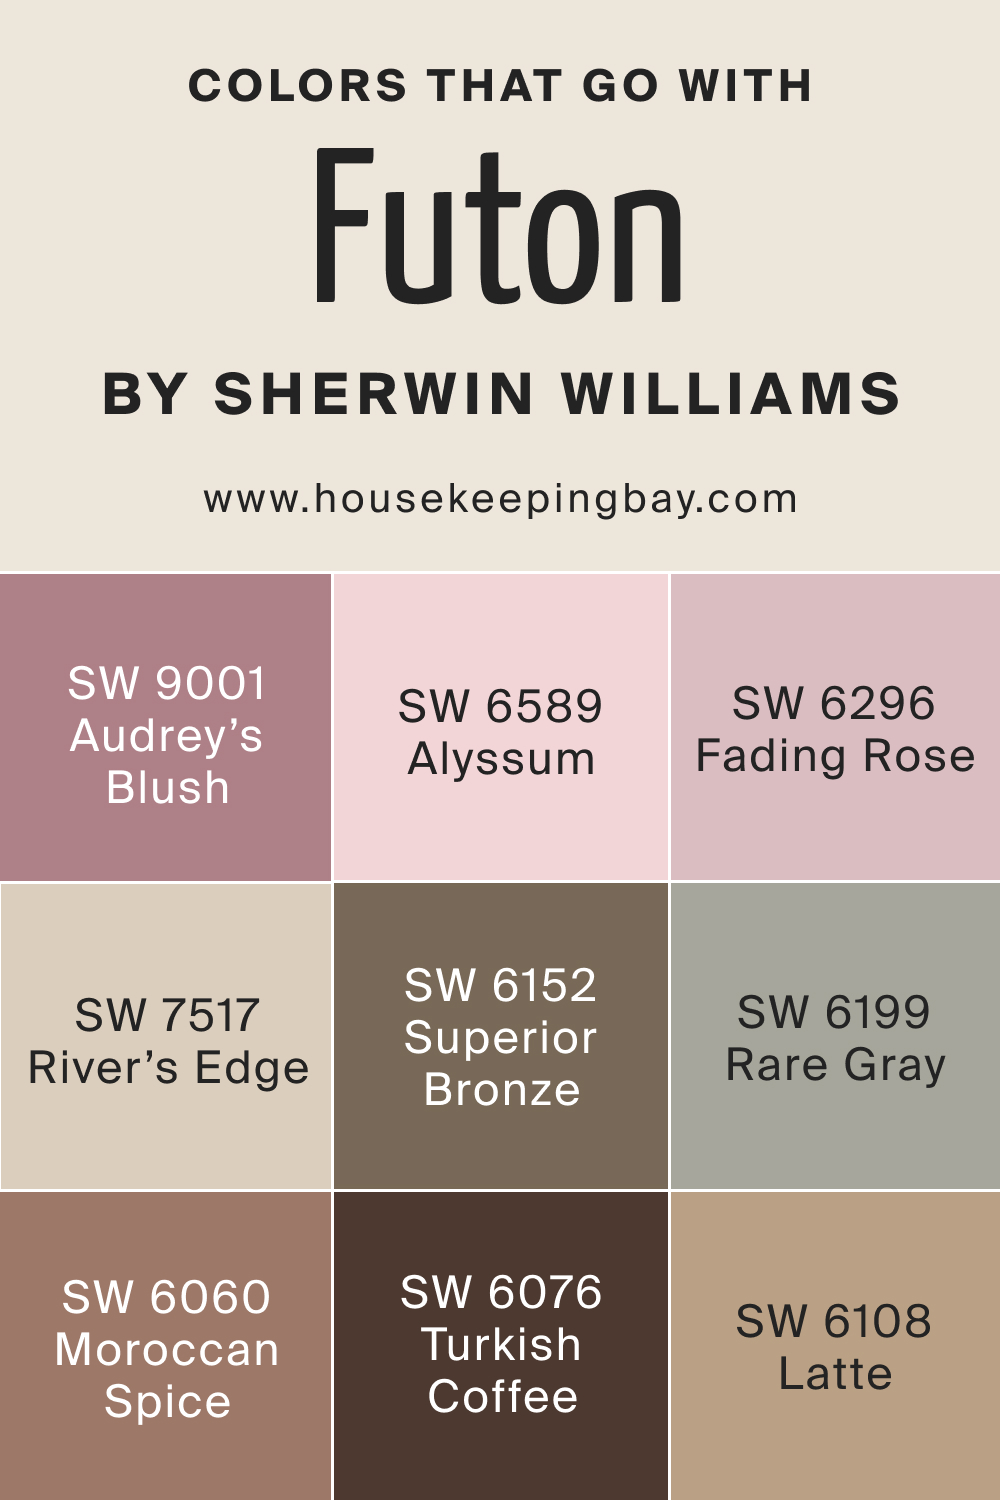 Colors that goes with SW 7101 Futon by Sherwin Williams